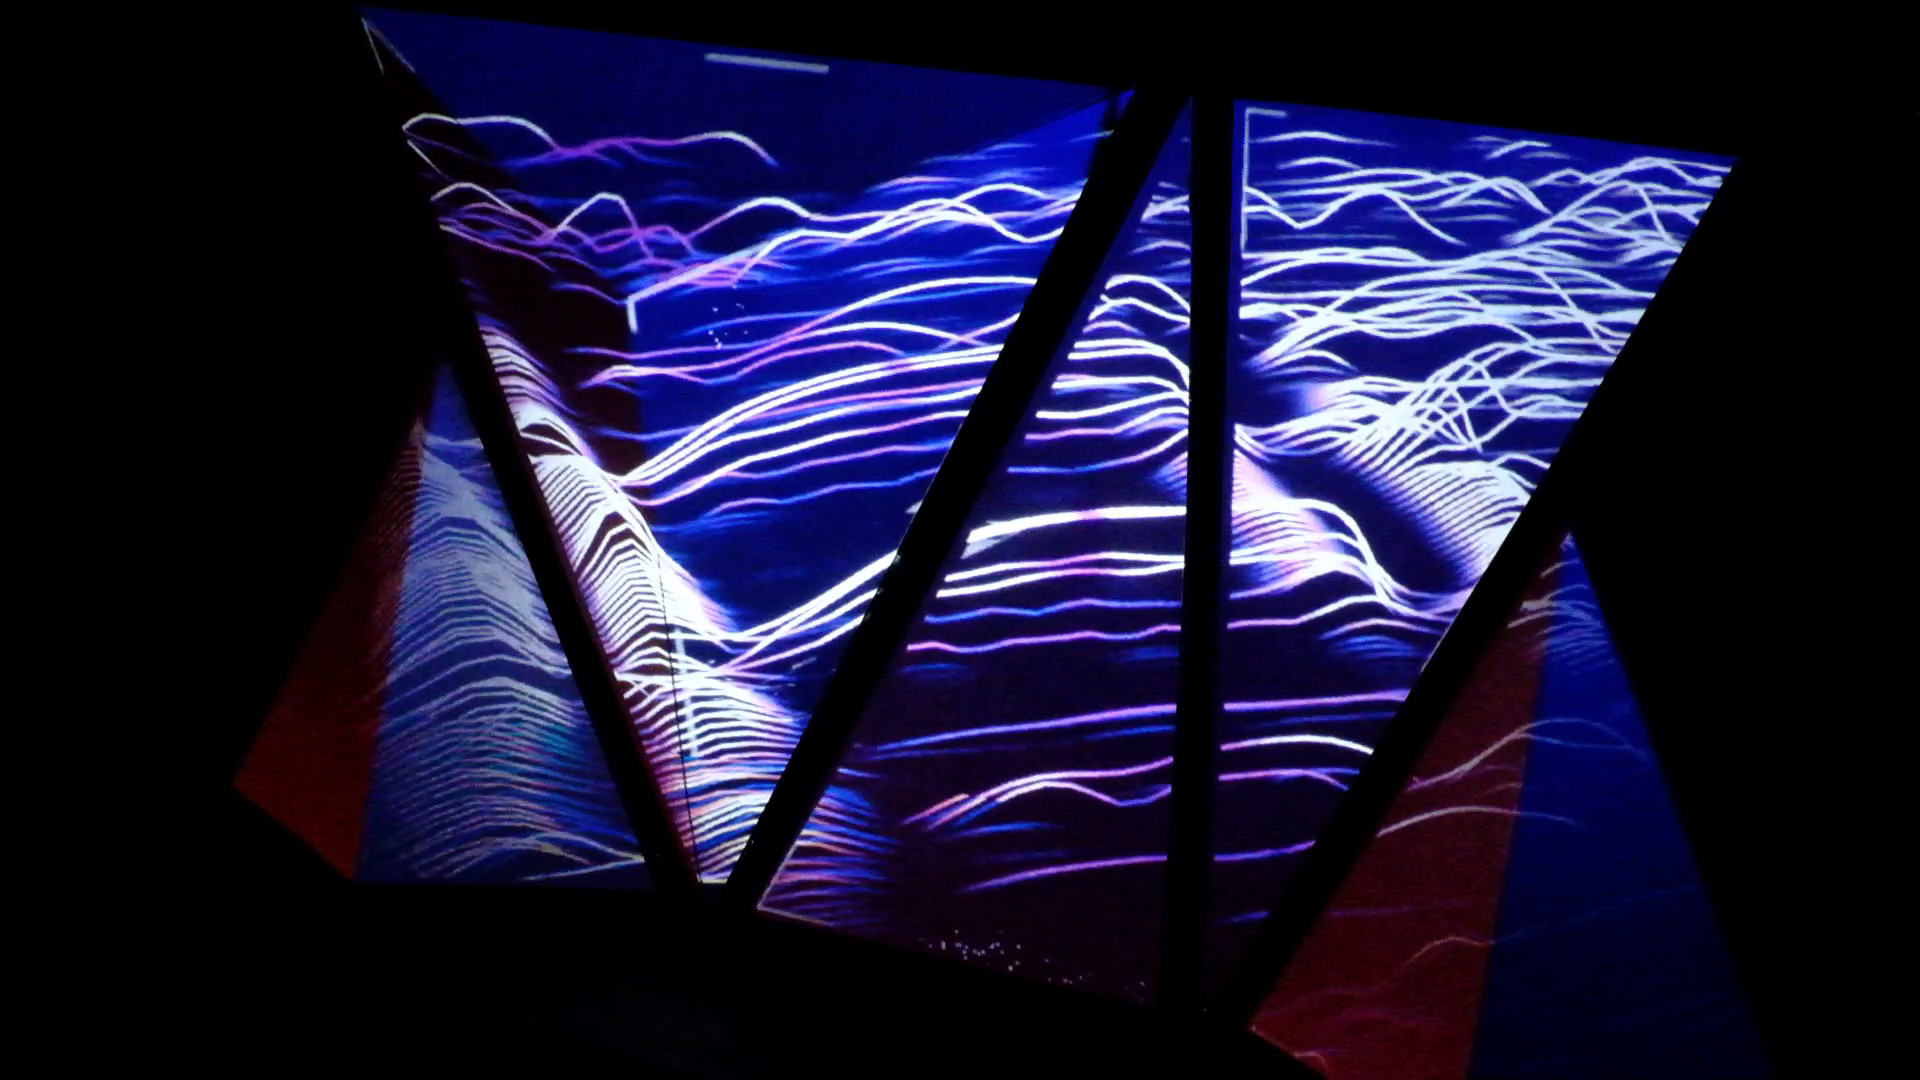 TouchDesigner is used to create interactive visuals that transform Boostman’s performance into a visually stunning light show.